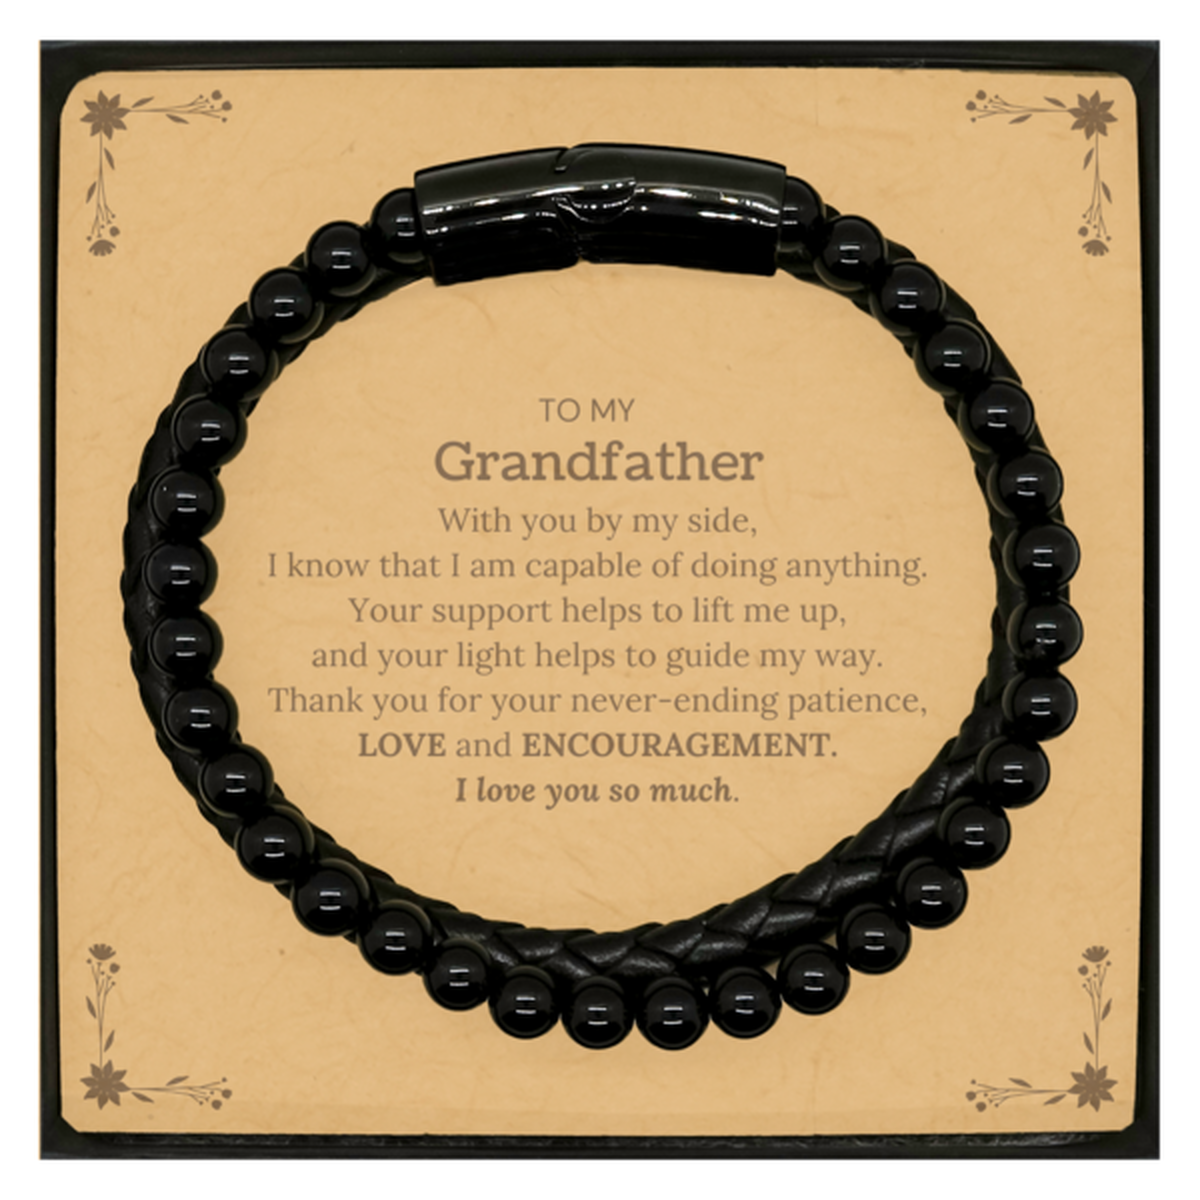 Appreciation Grandfather Stone Leather Bracelets Gifts, To My Grandfather Birthday Christmas Wedding Keepsake Gifts for Grandfather With you by my side, I know that I am capable of doing anything. I love you so much